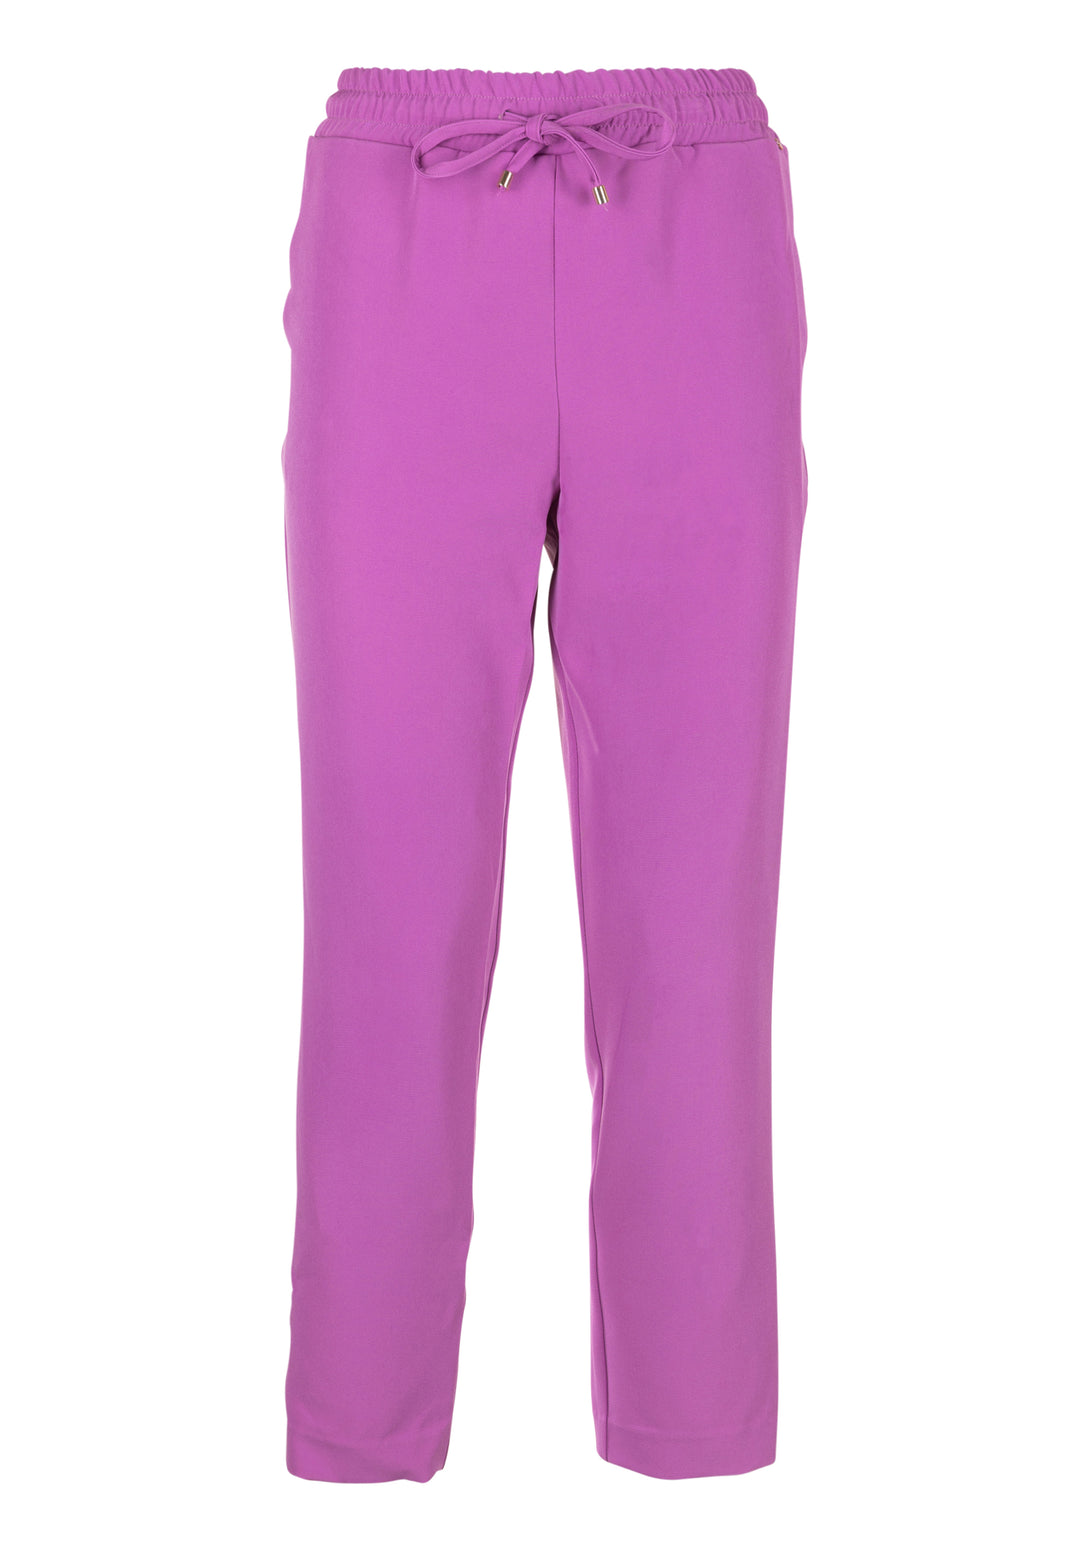 Jogger pant regular fit made in technical fabric